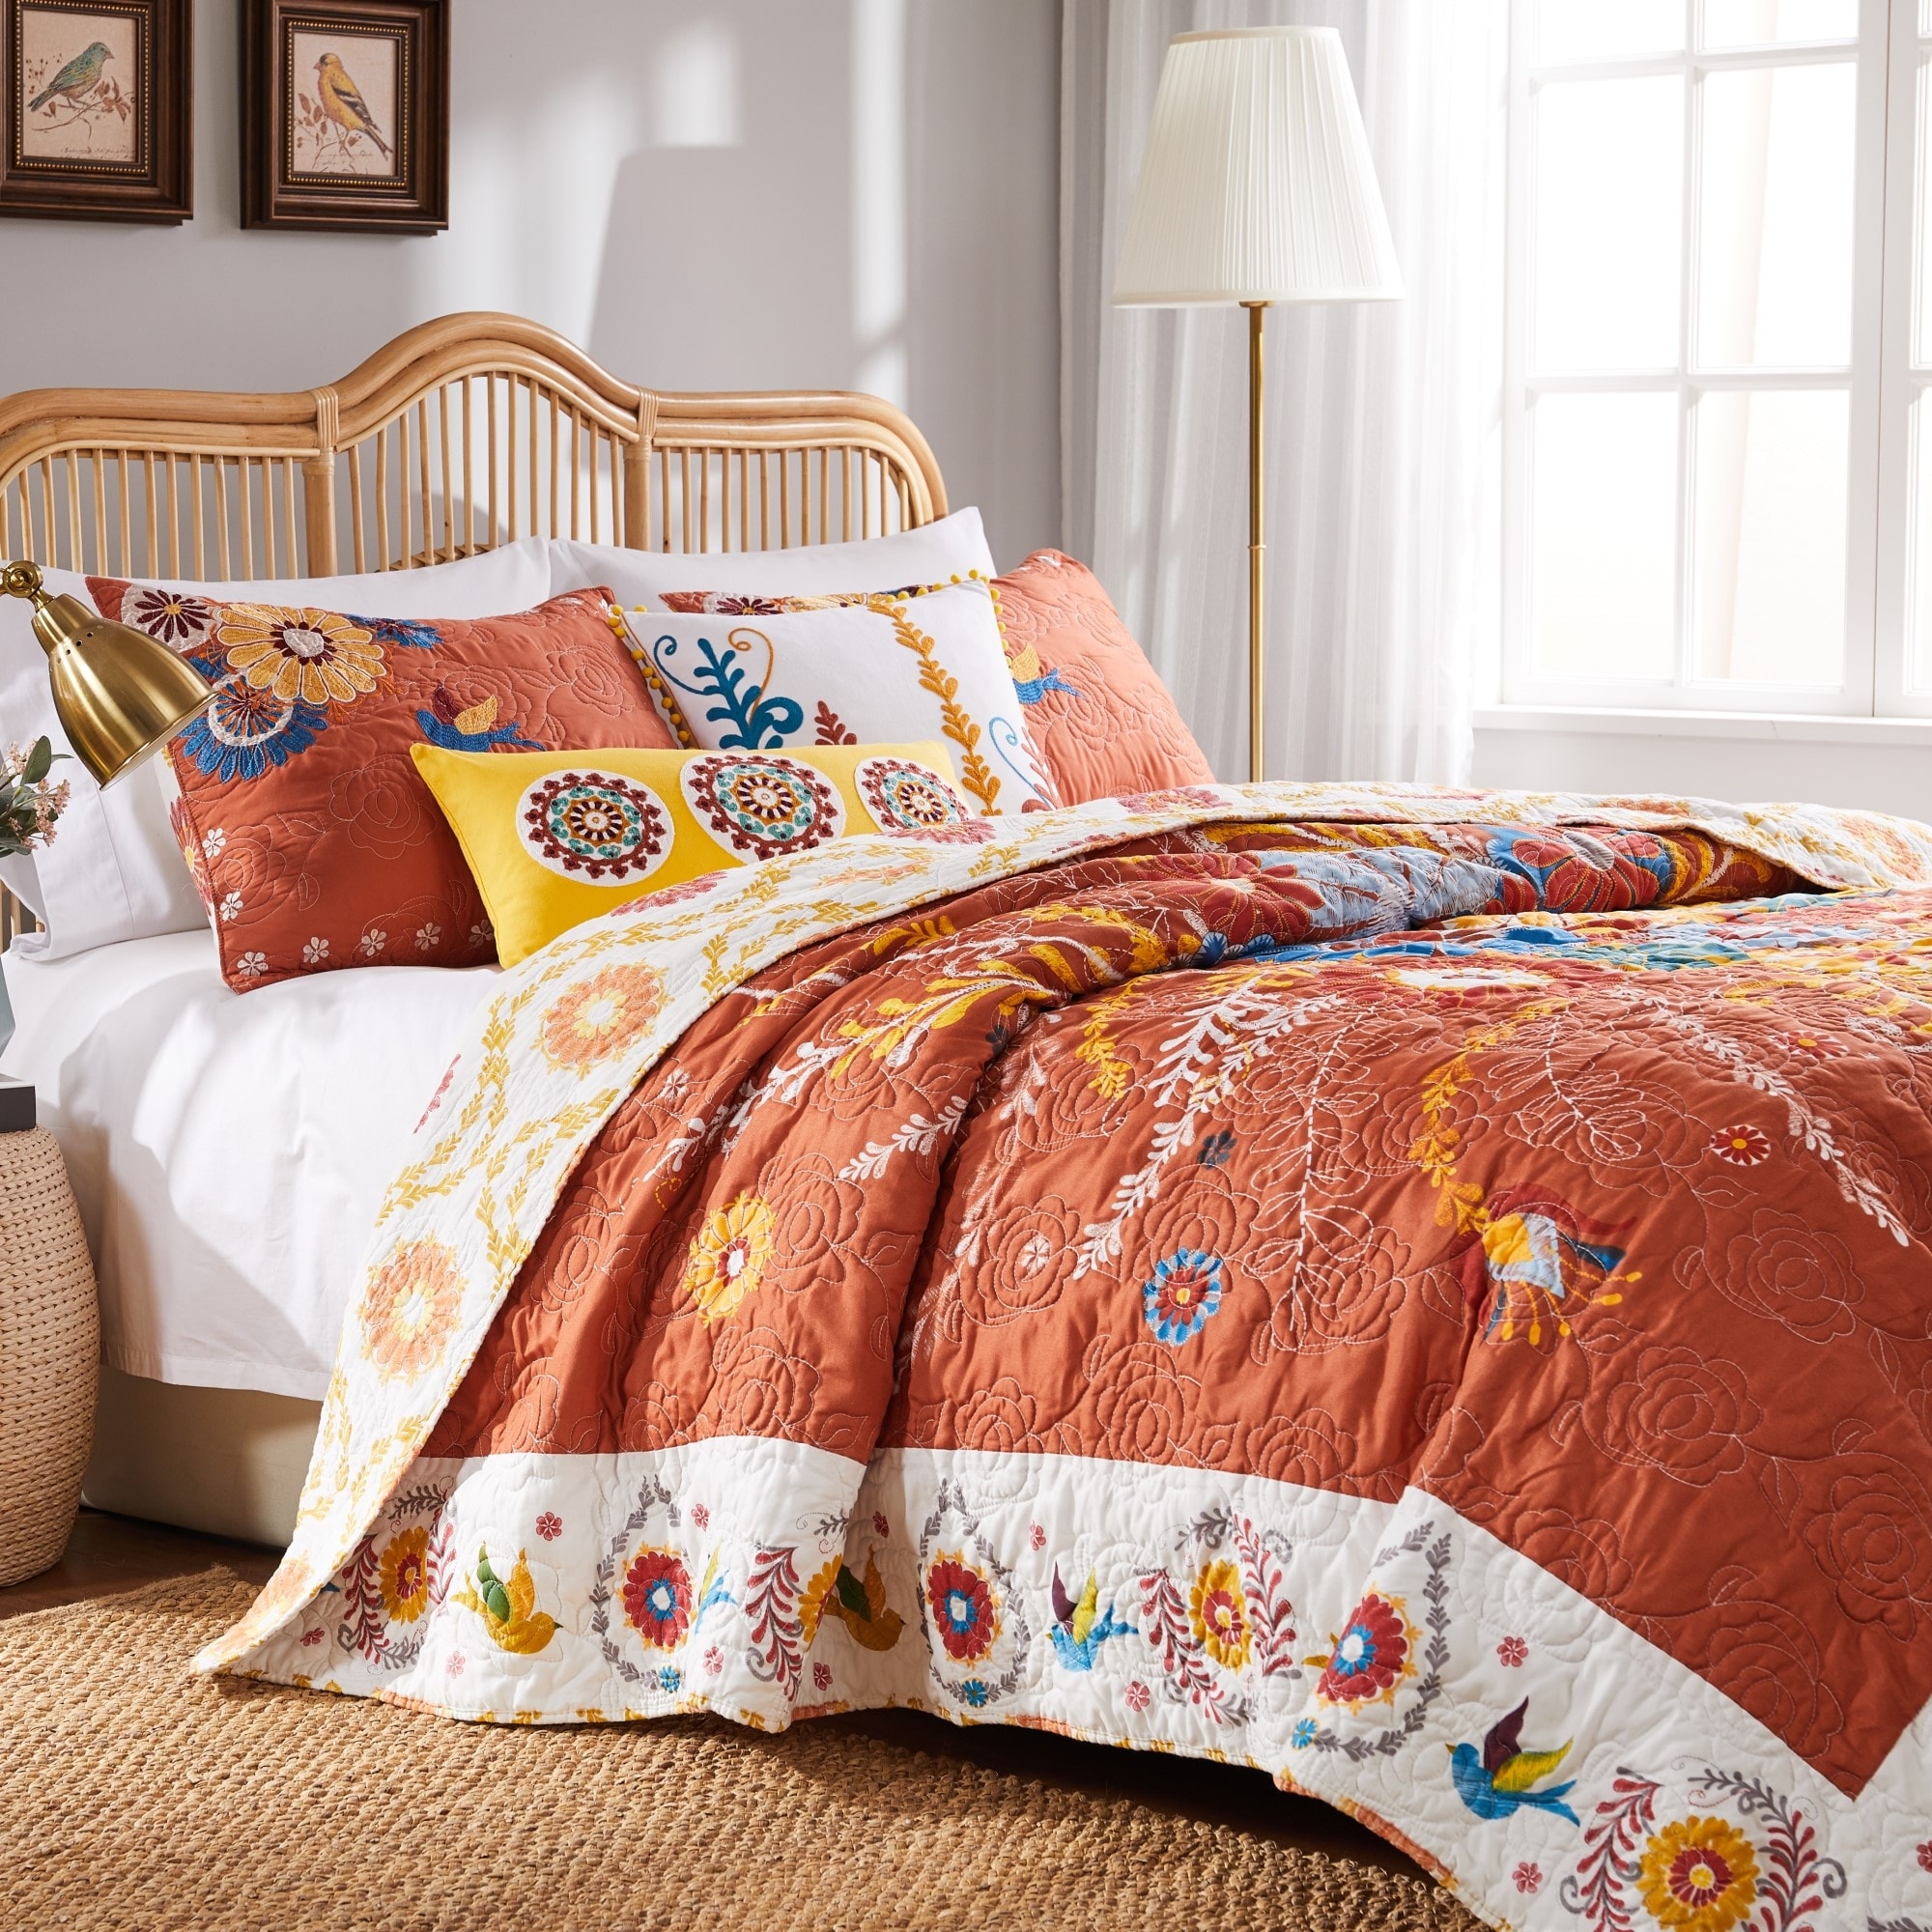 Floral Quilts and Bedspreads - Bed Bath & Beyond